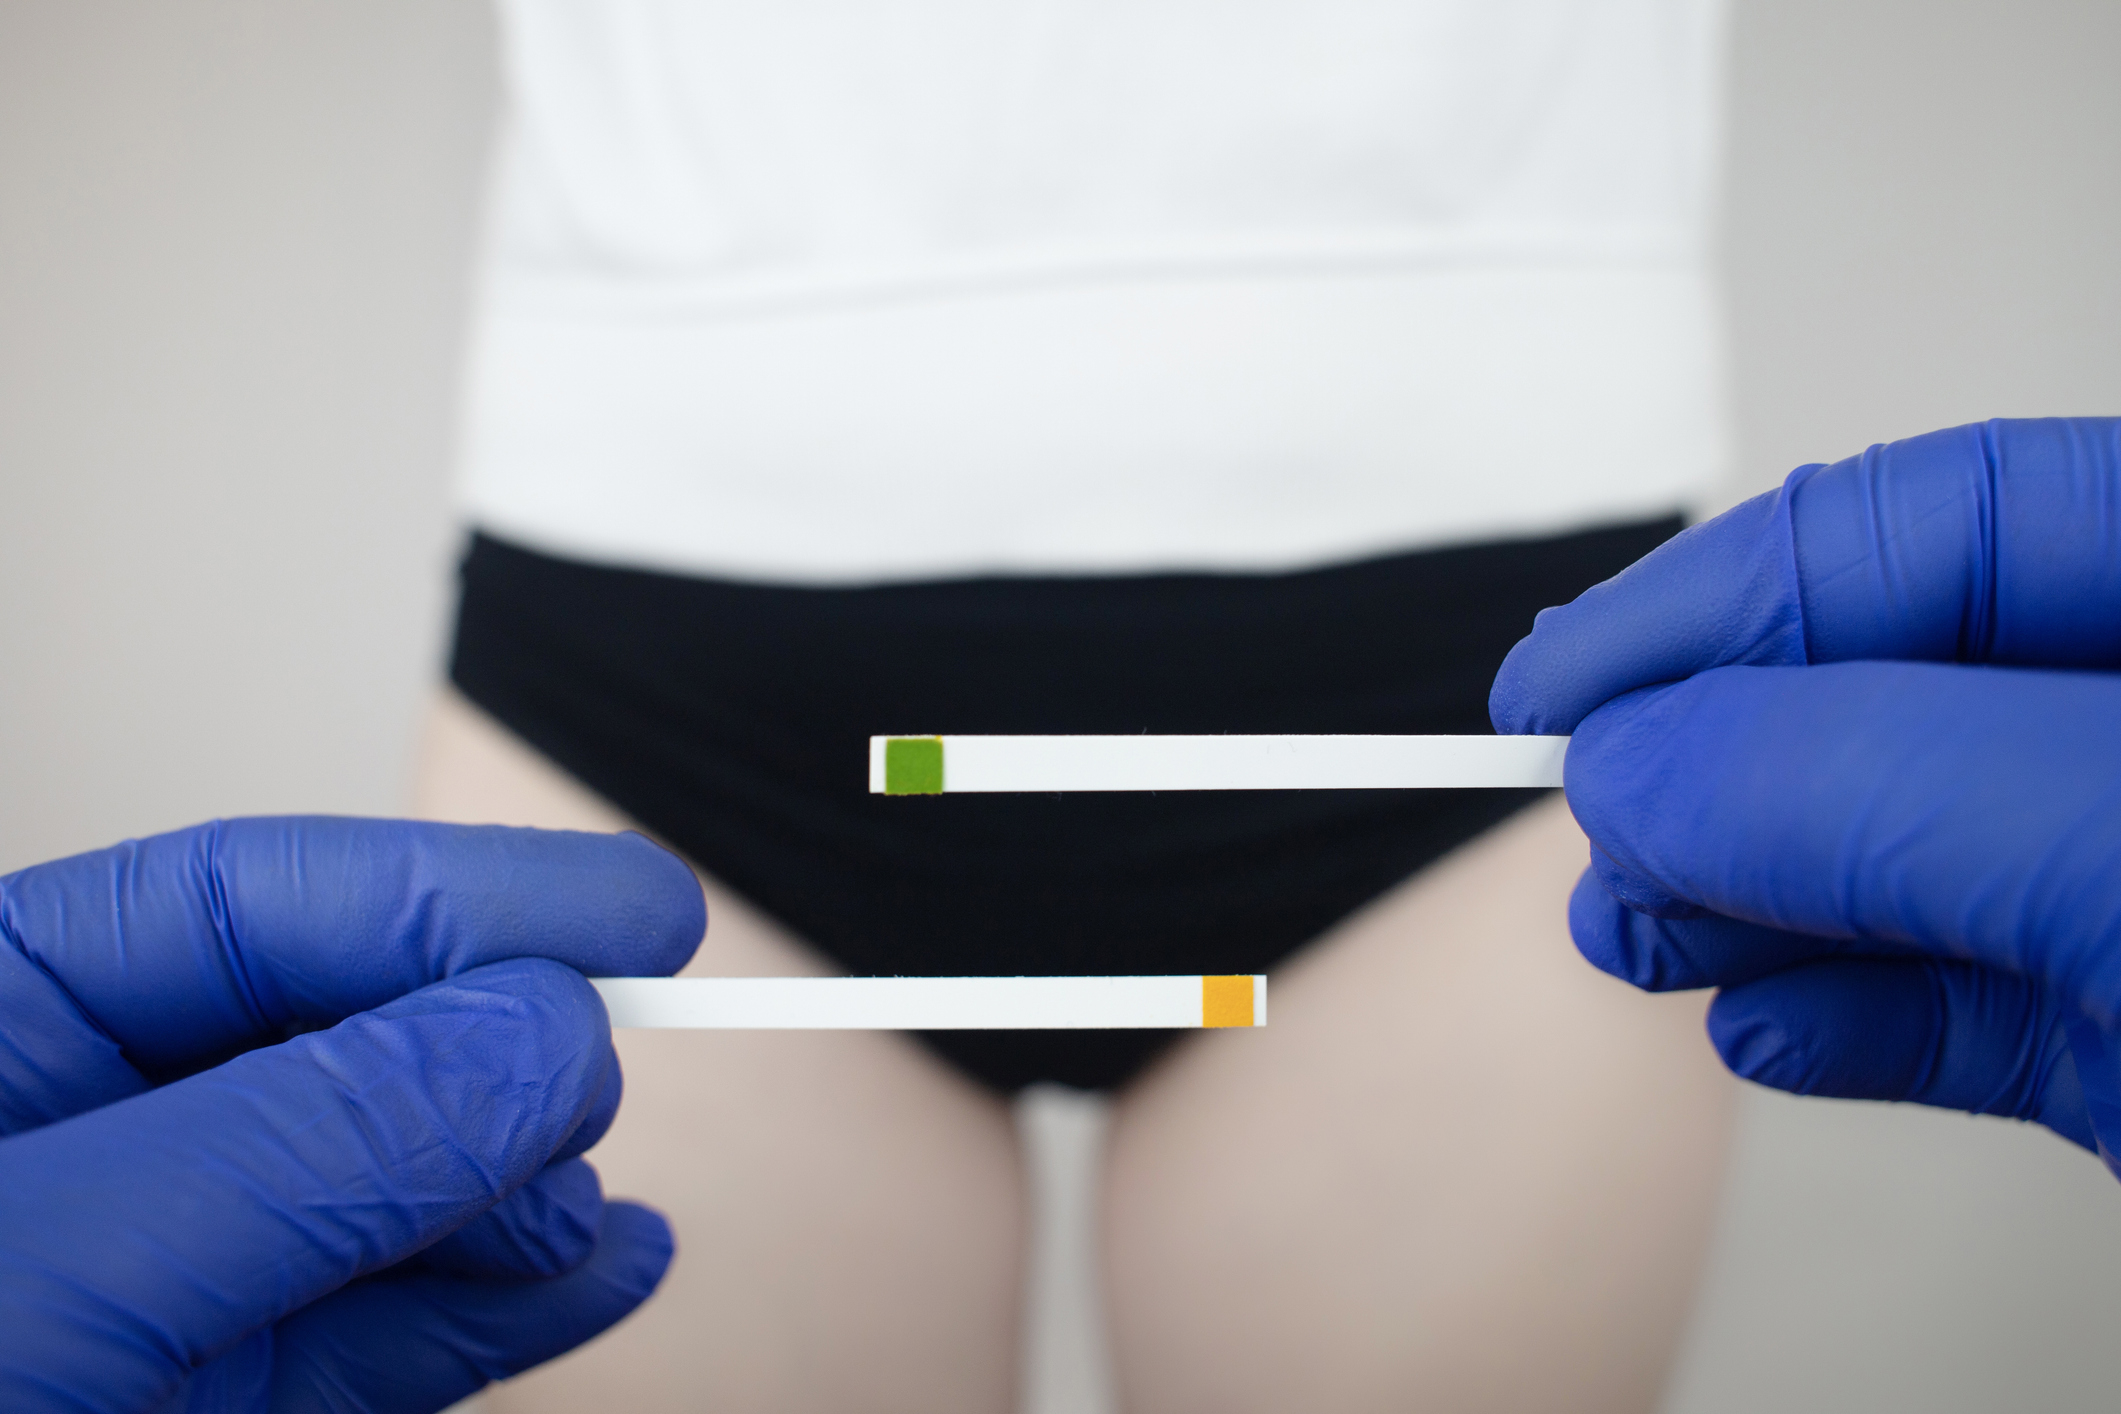 A person holding two pH testing strips, one green and one yellow, near their waist